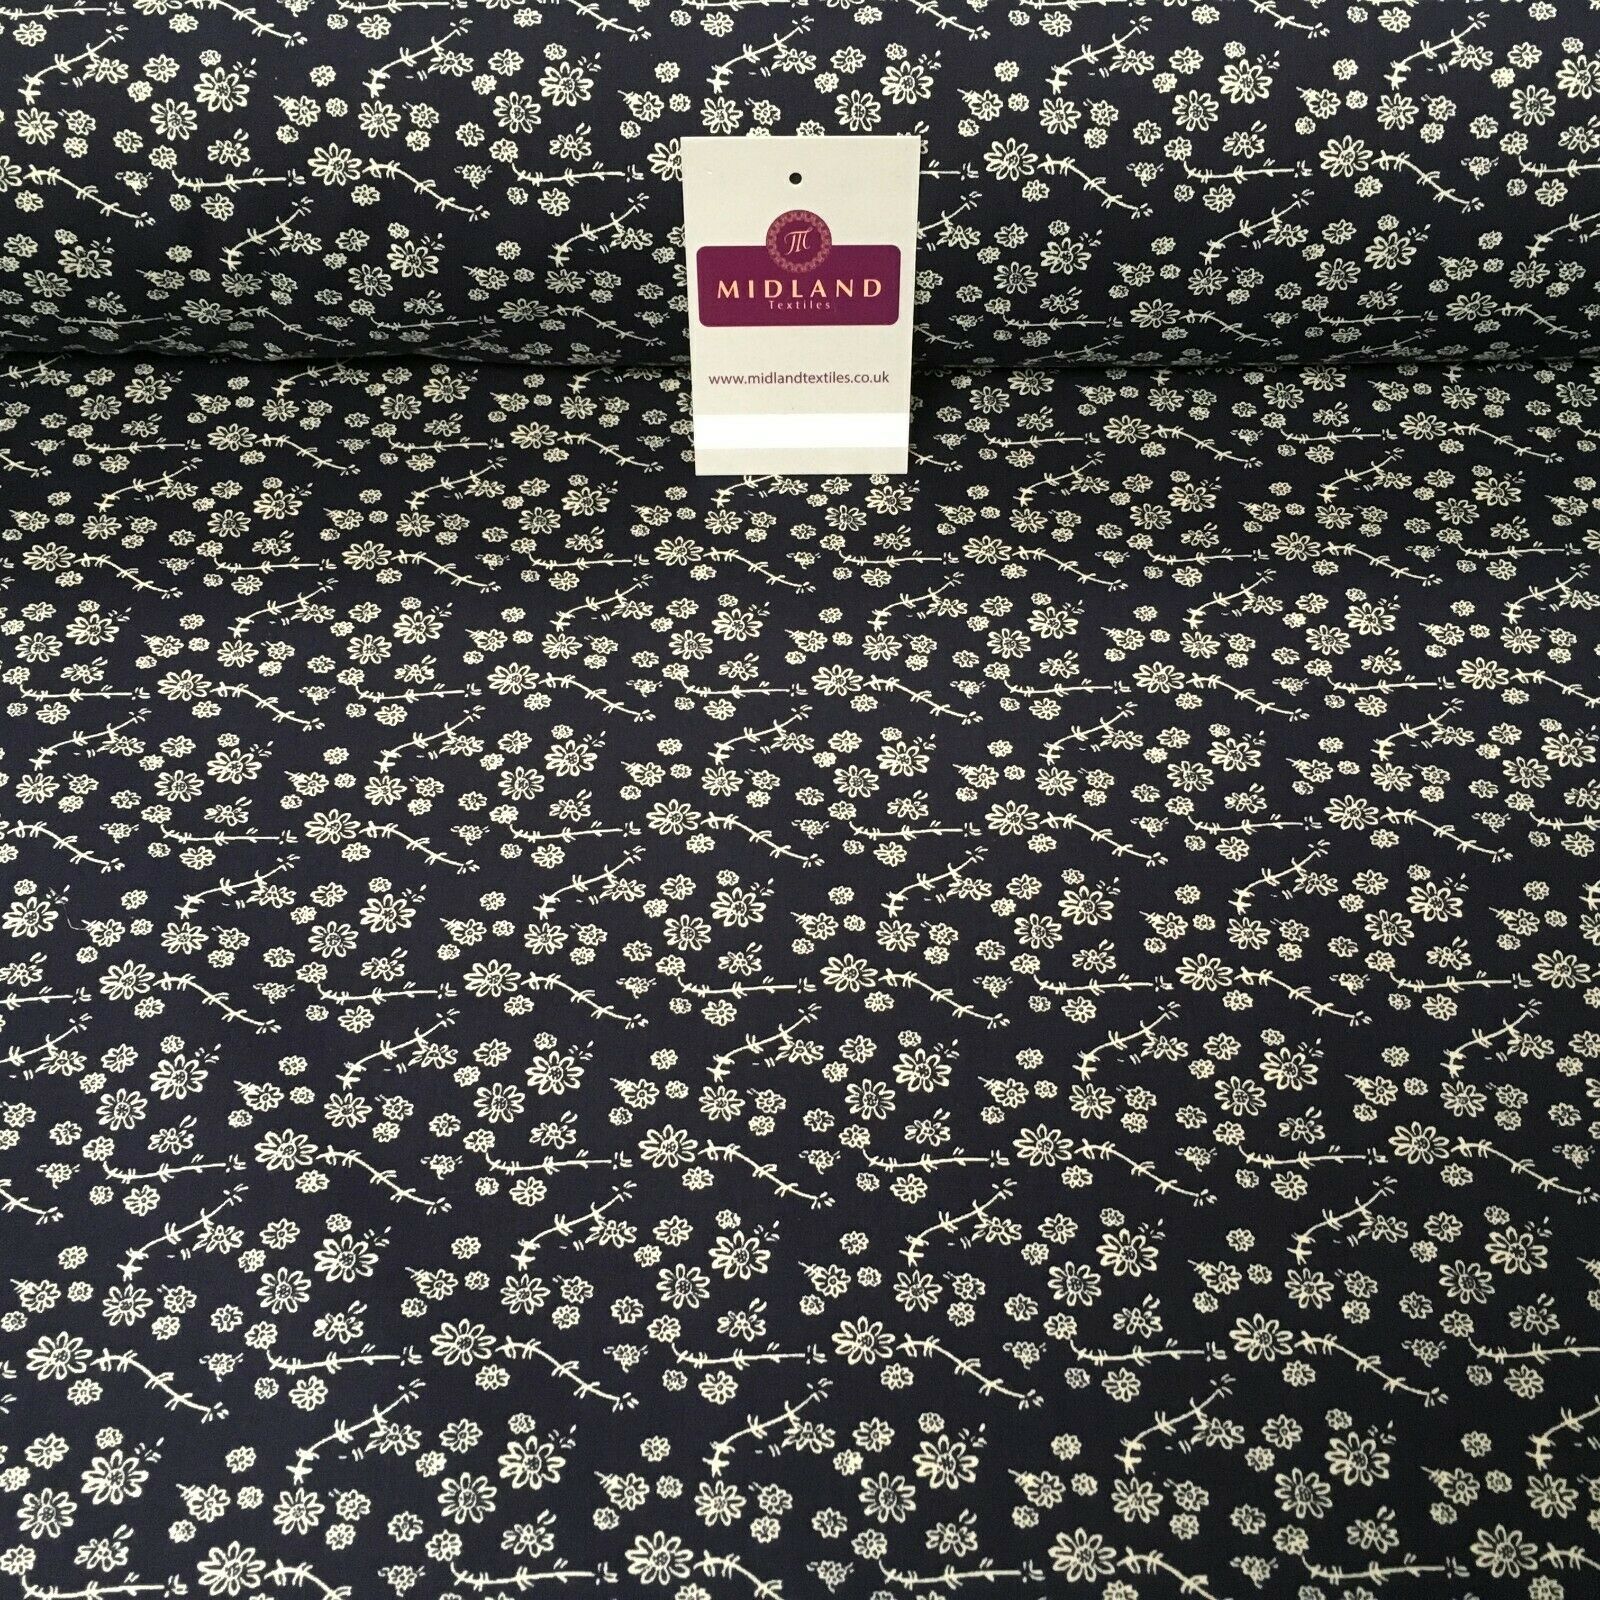 100% Cotton Small Floral Printed Dress Fabric 150cm wide MA1079 Mtex